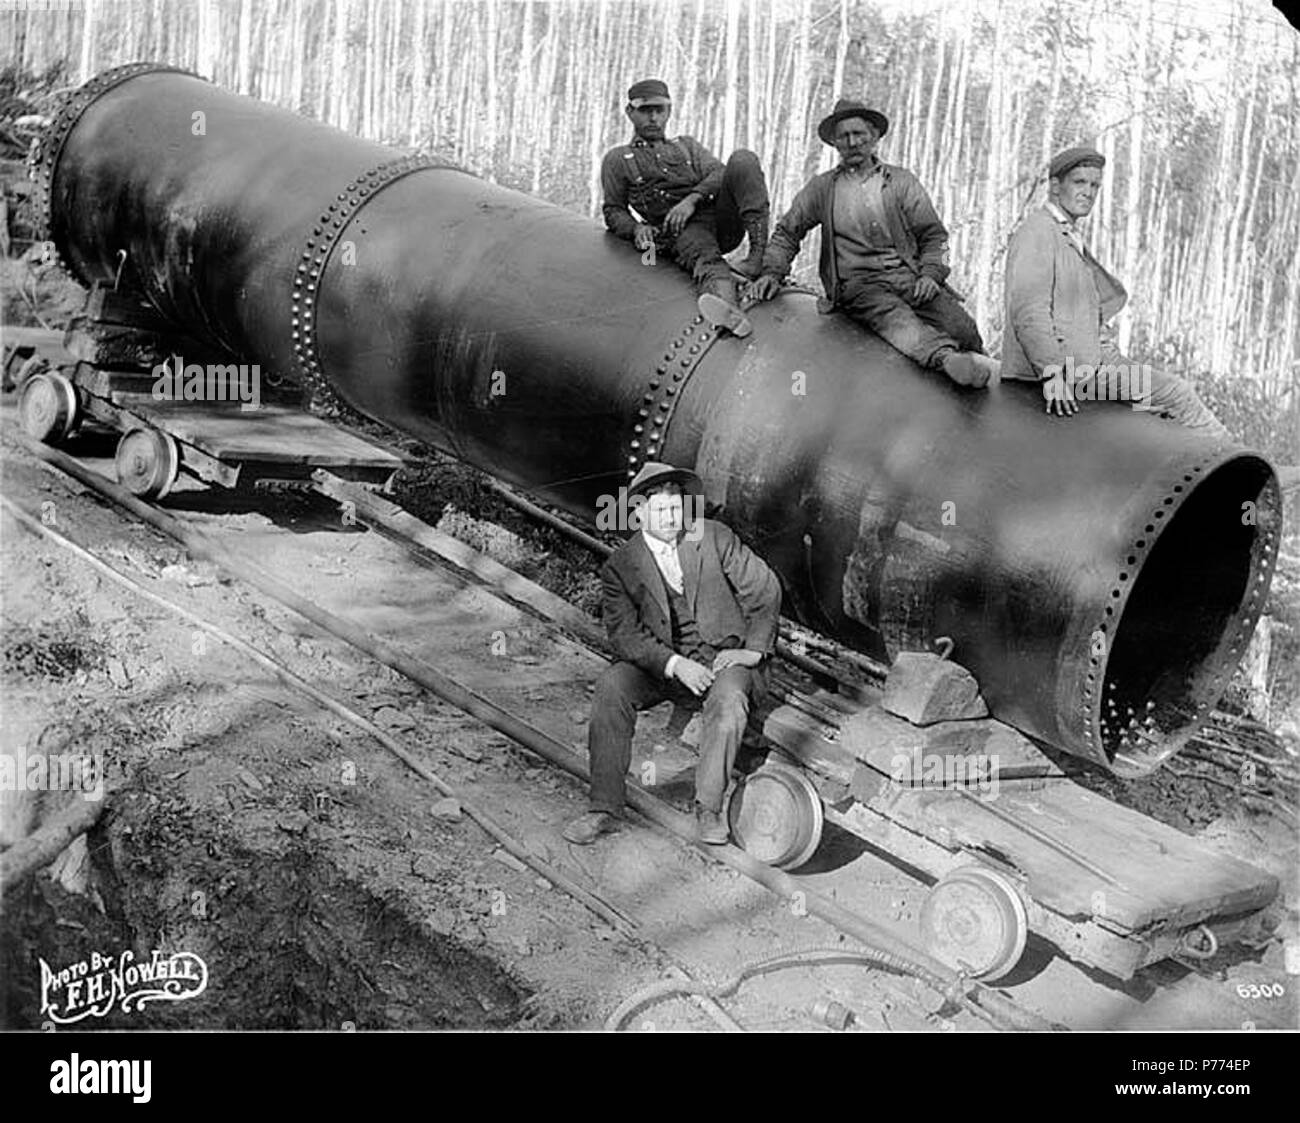 English: Men sitting on large pipe section, Alaska (), n.d. English:  Caption on image: Photo by F.H. Nowell, 6300 Subjects (LCTGM): Pipes  (Conduits)--Alaska; Group portraits . Unknown date 9 Men sitting